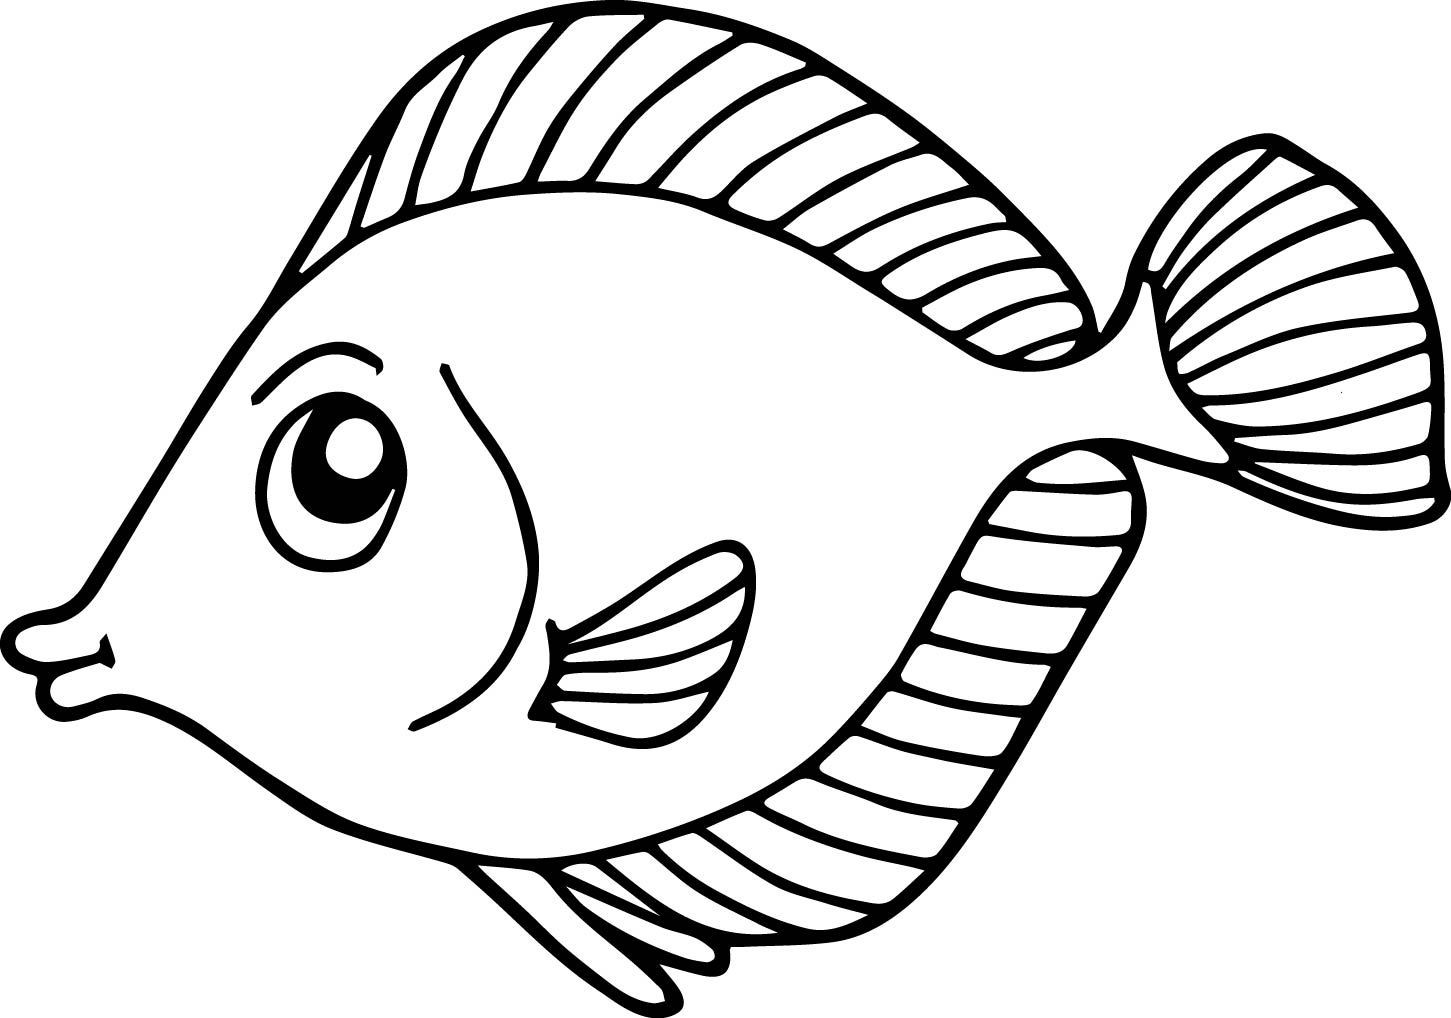 Coloring Pages Fish For Kids
 Fish Coloring Pages For Kids Preschool and Kindergarten